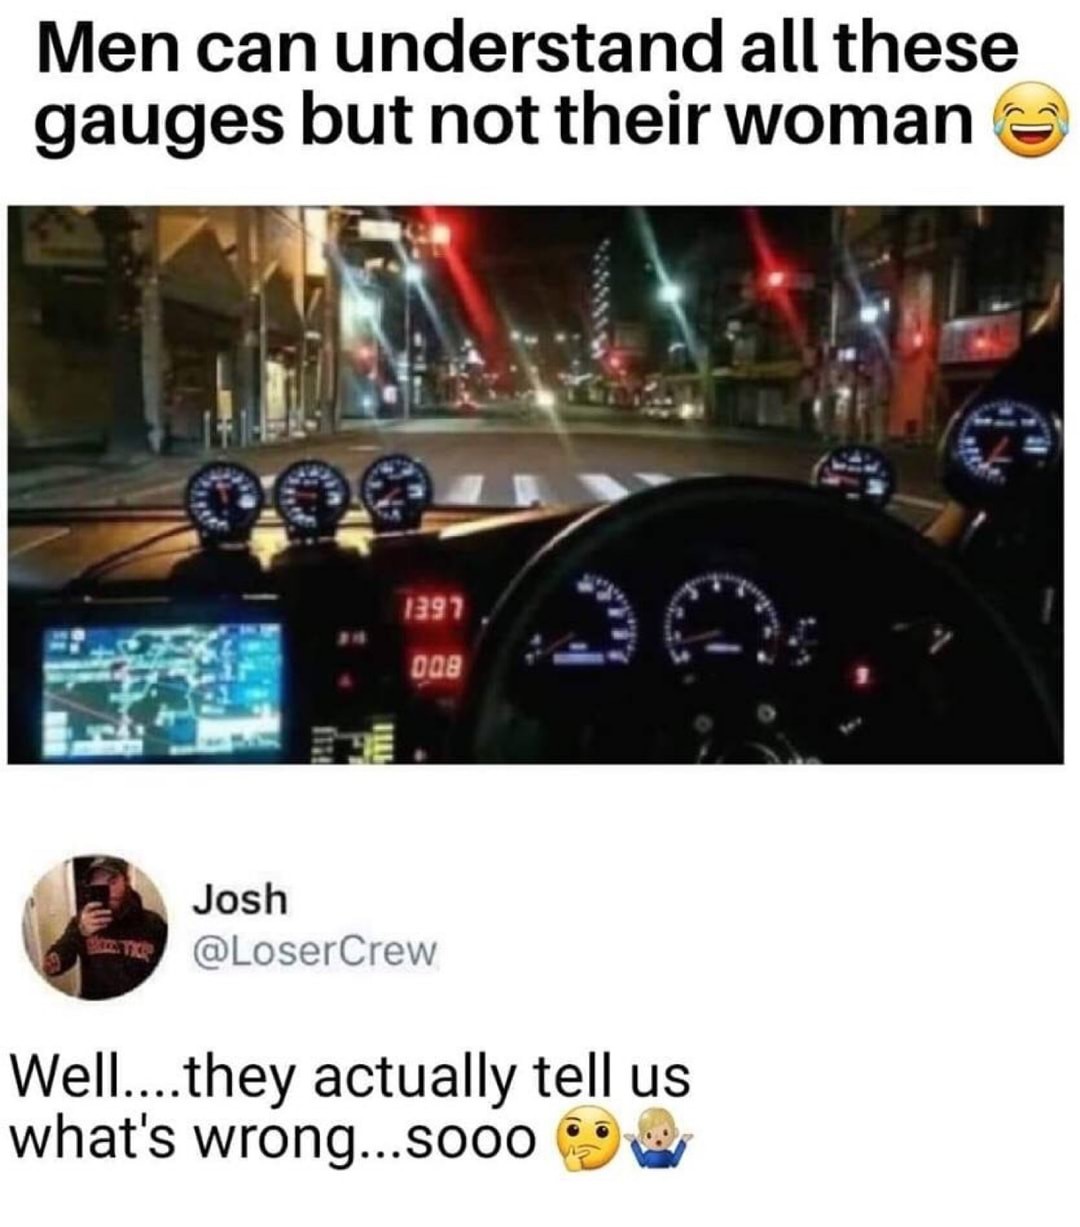 Humour - Men can understand all these gauges but not their woman 1397 008 Josh Well....they actually tell us what's wrong...soooo